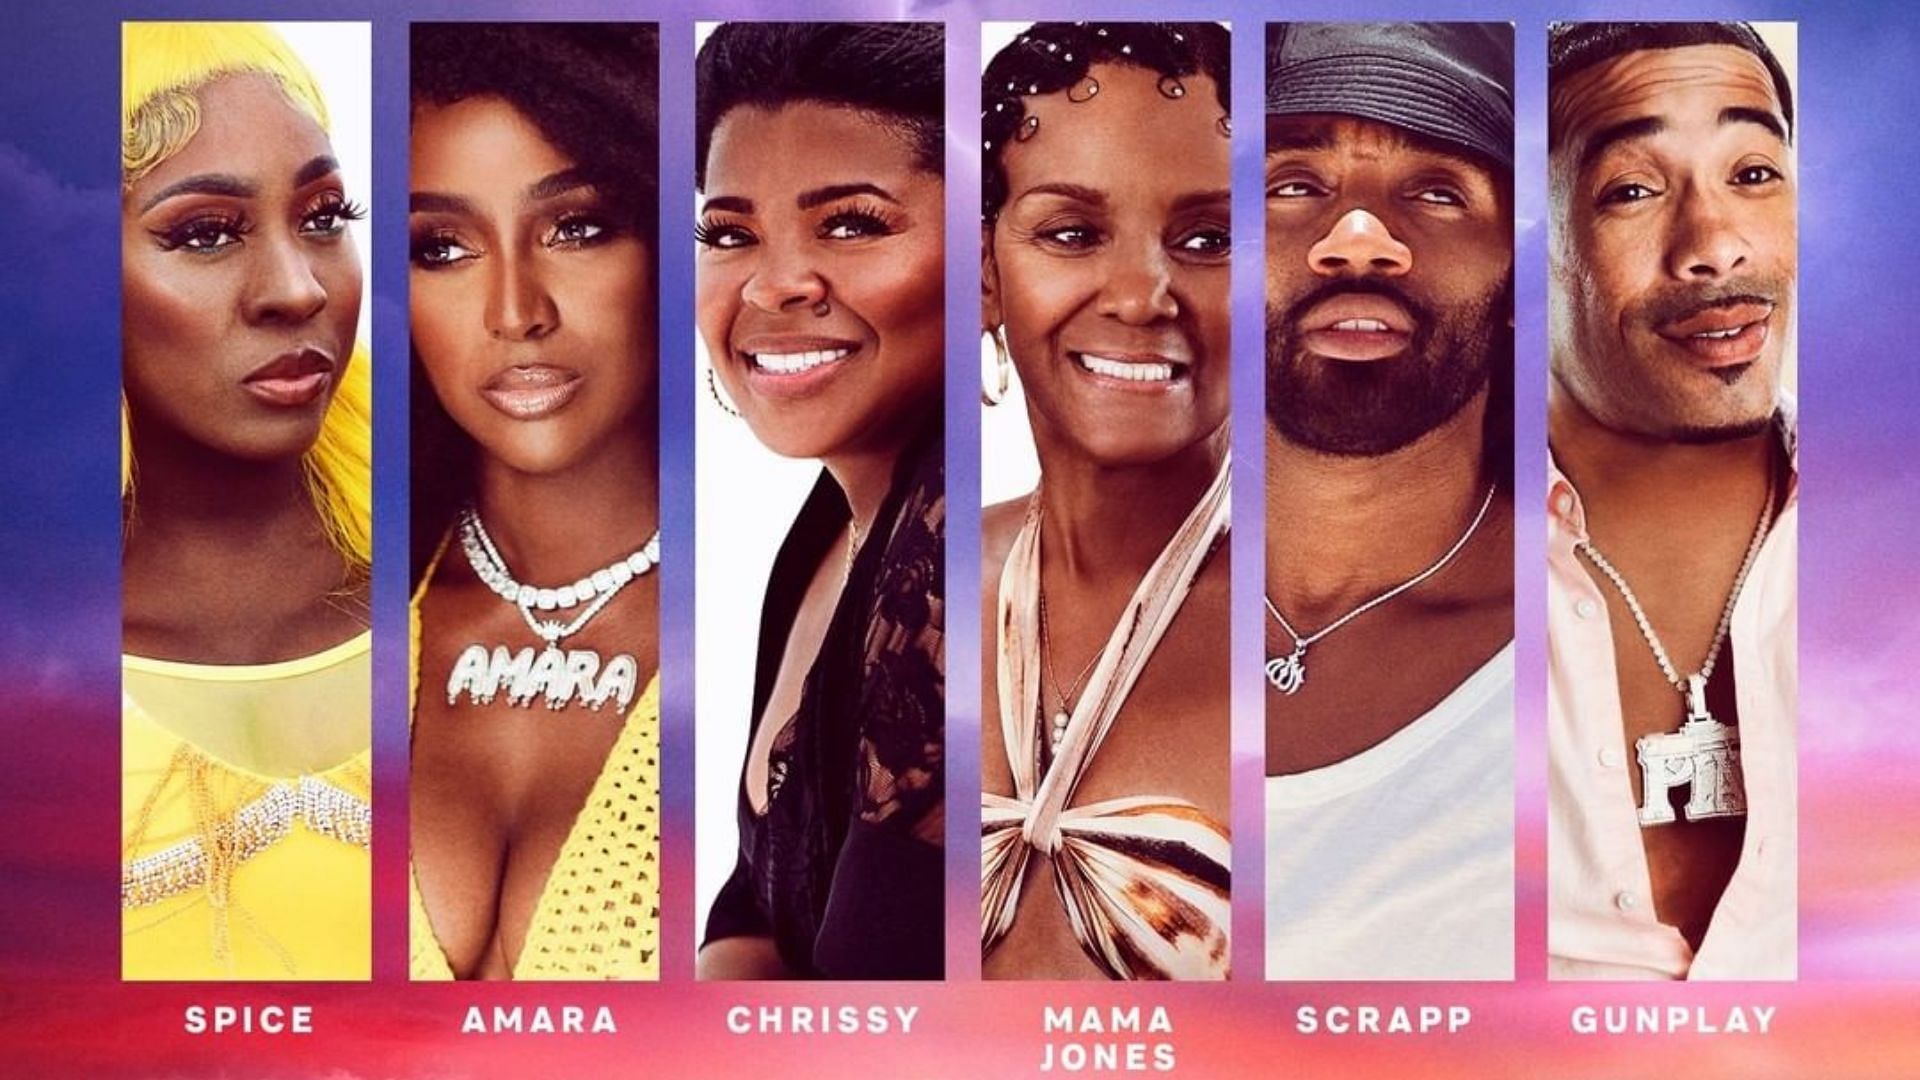 what-time-will-family-reunion-love-hip-hop-edition-season-3-premiere-on-vh1-details-explored